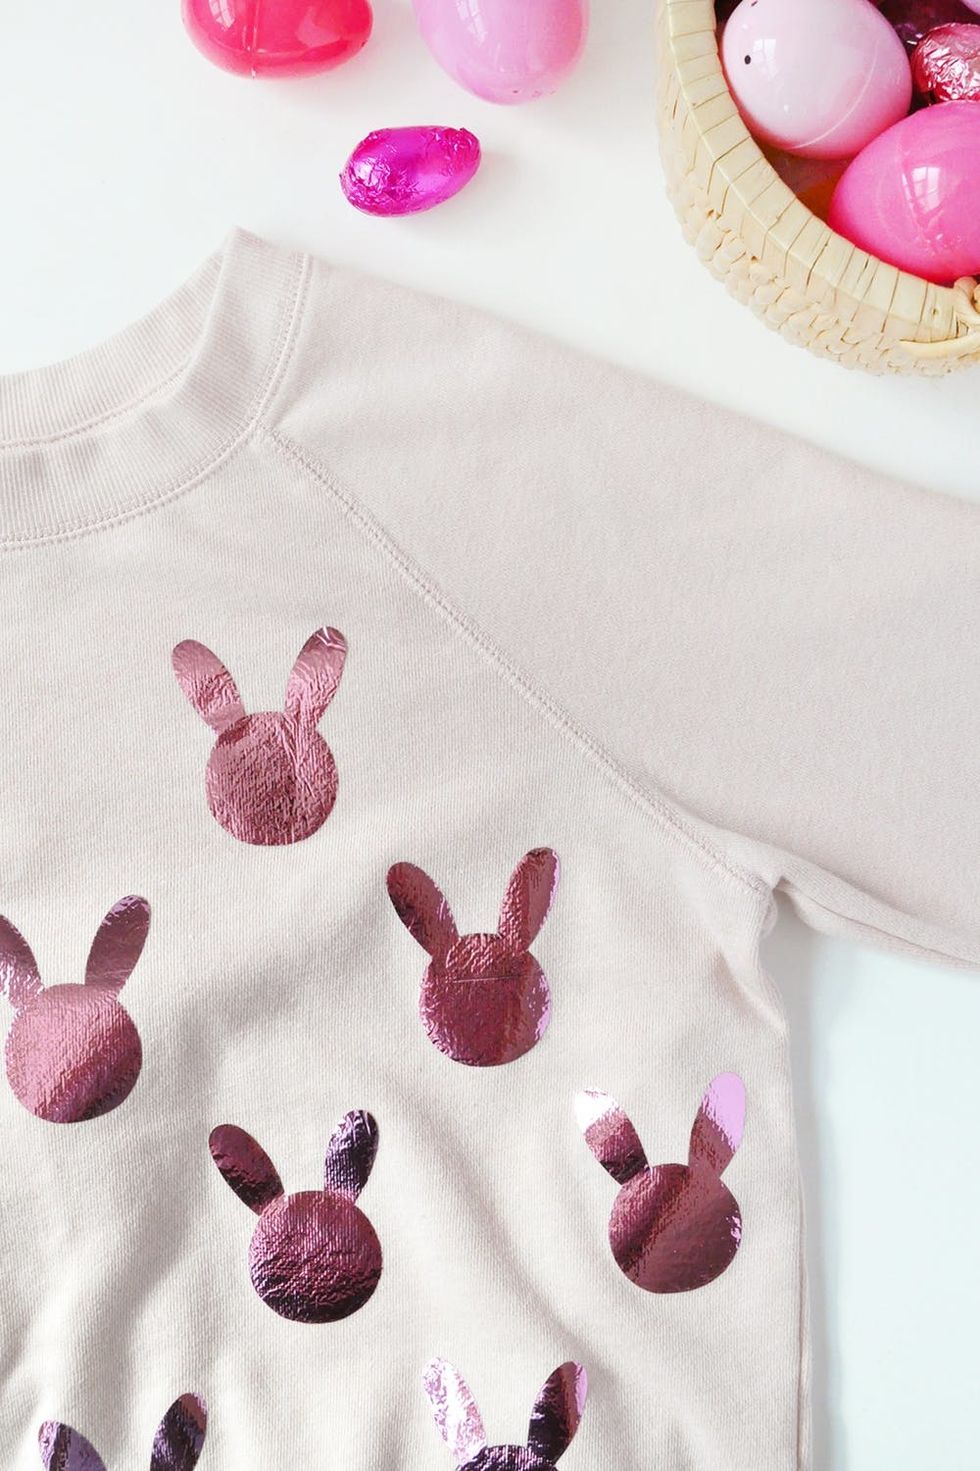 Make Your Own Metallic Pink Bunny Sweater for Easter - Brit + Co